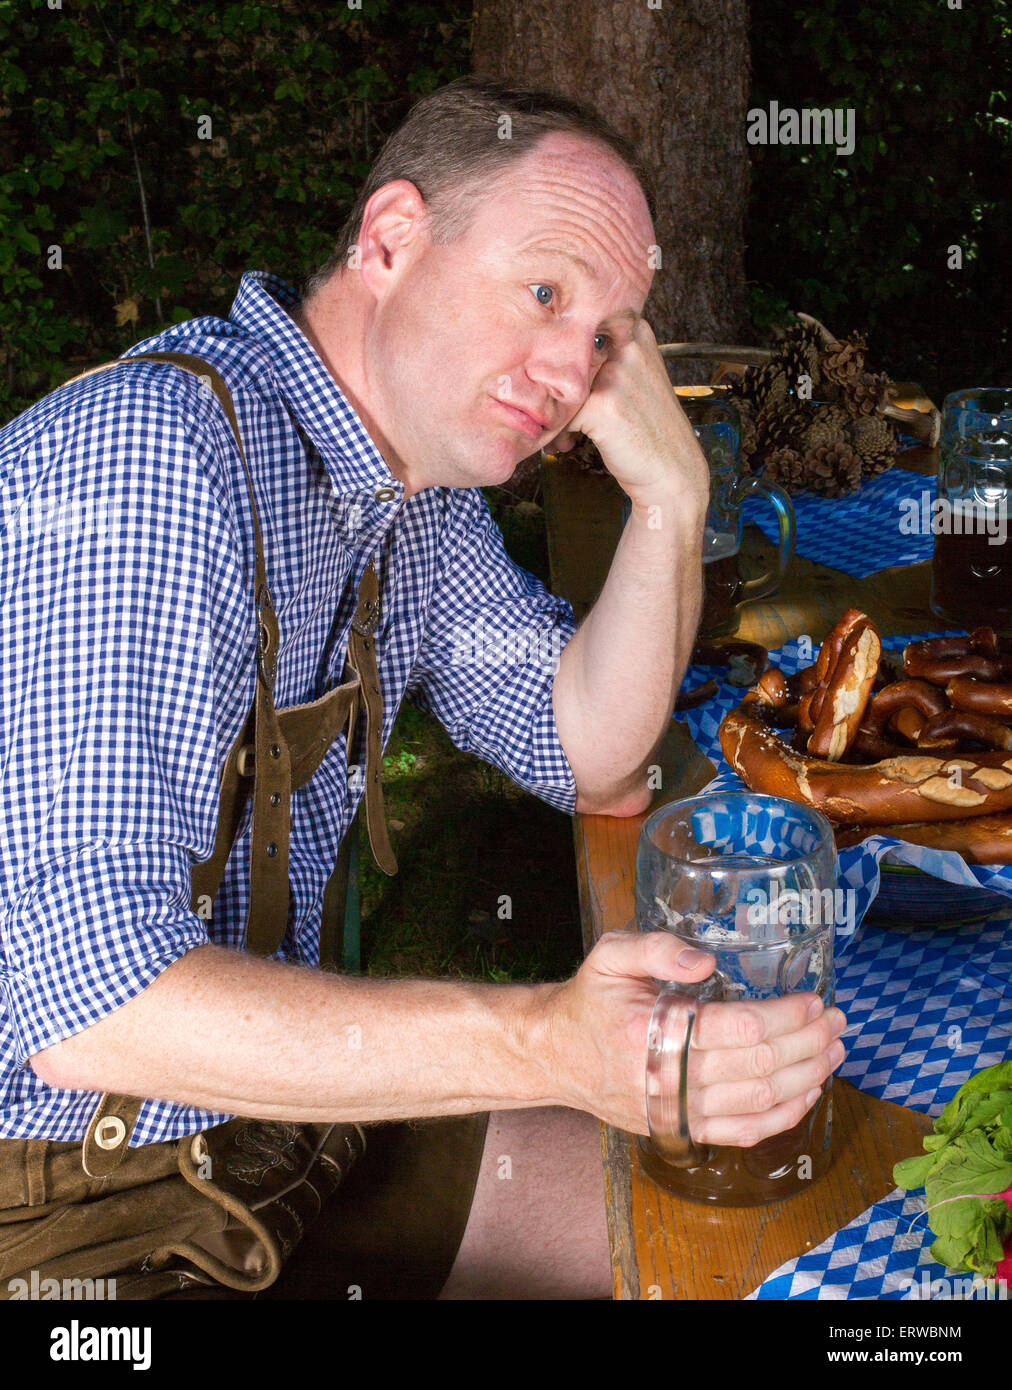 bavarian man sitting on bench with a beer mug Stock Photo